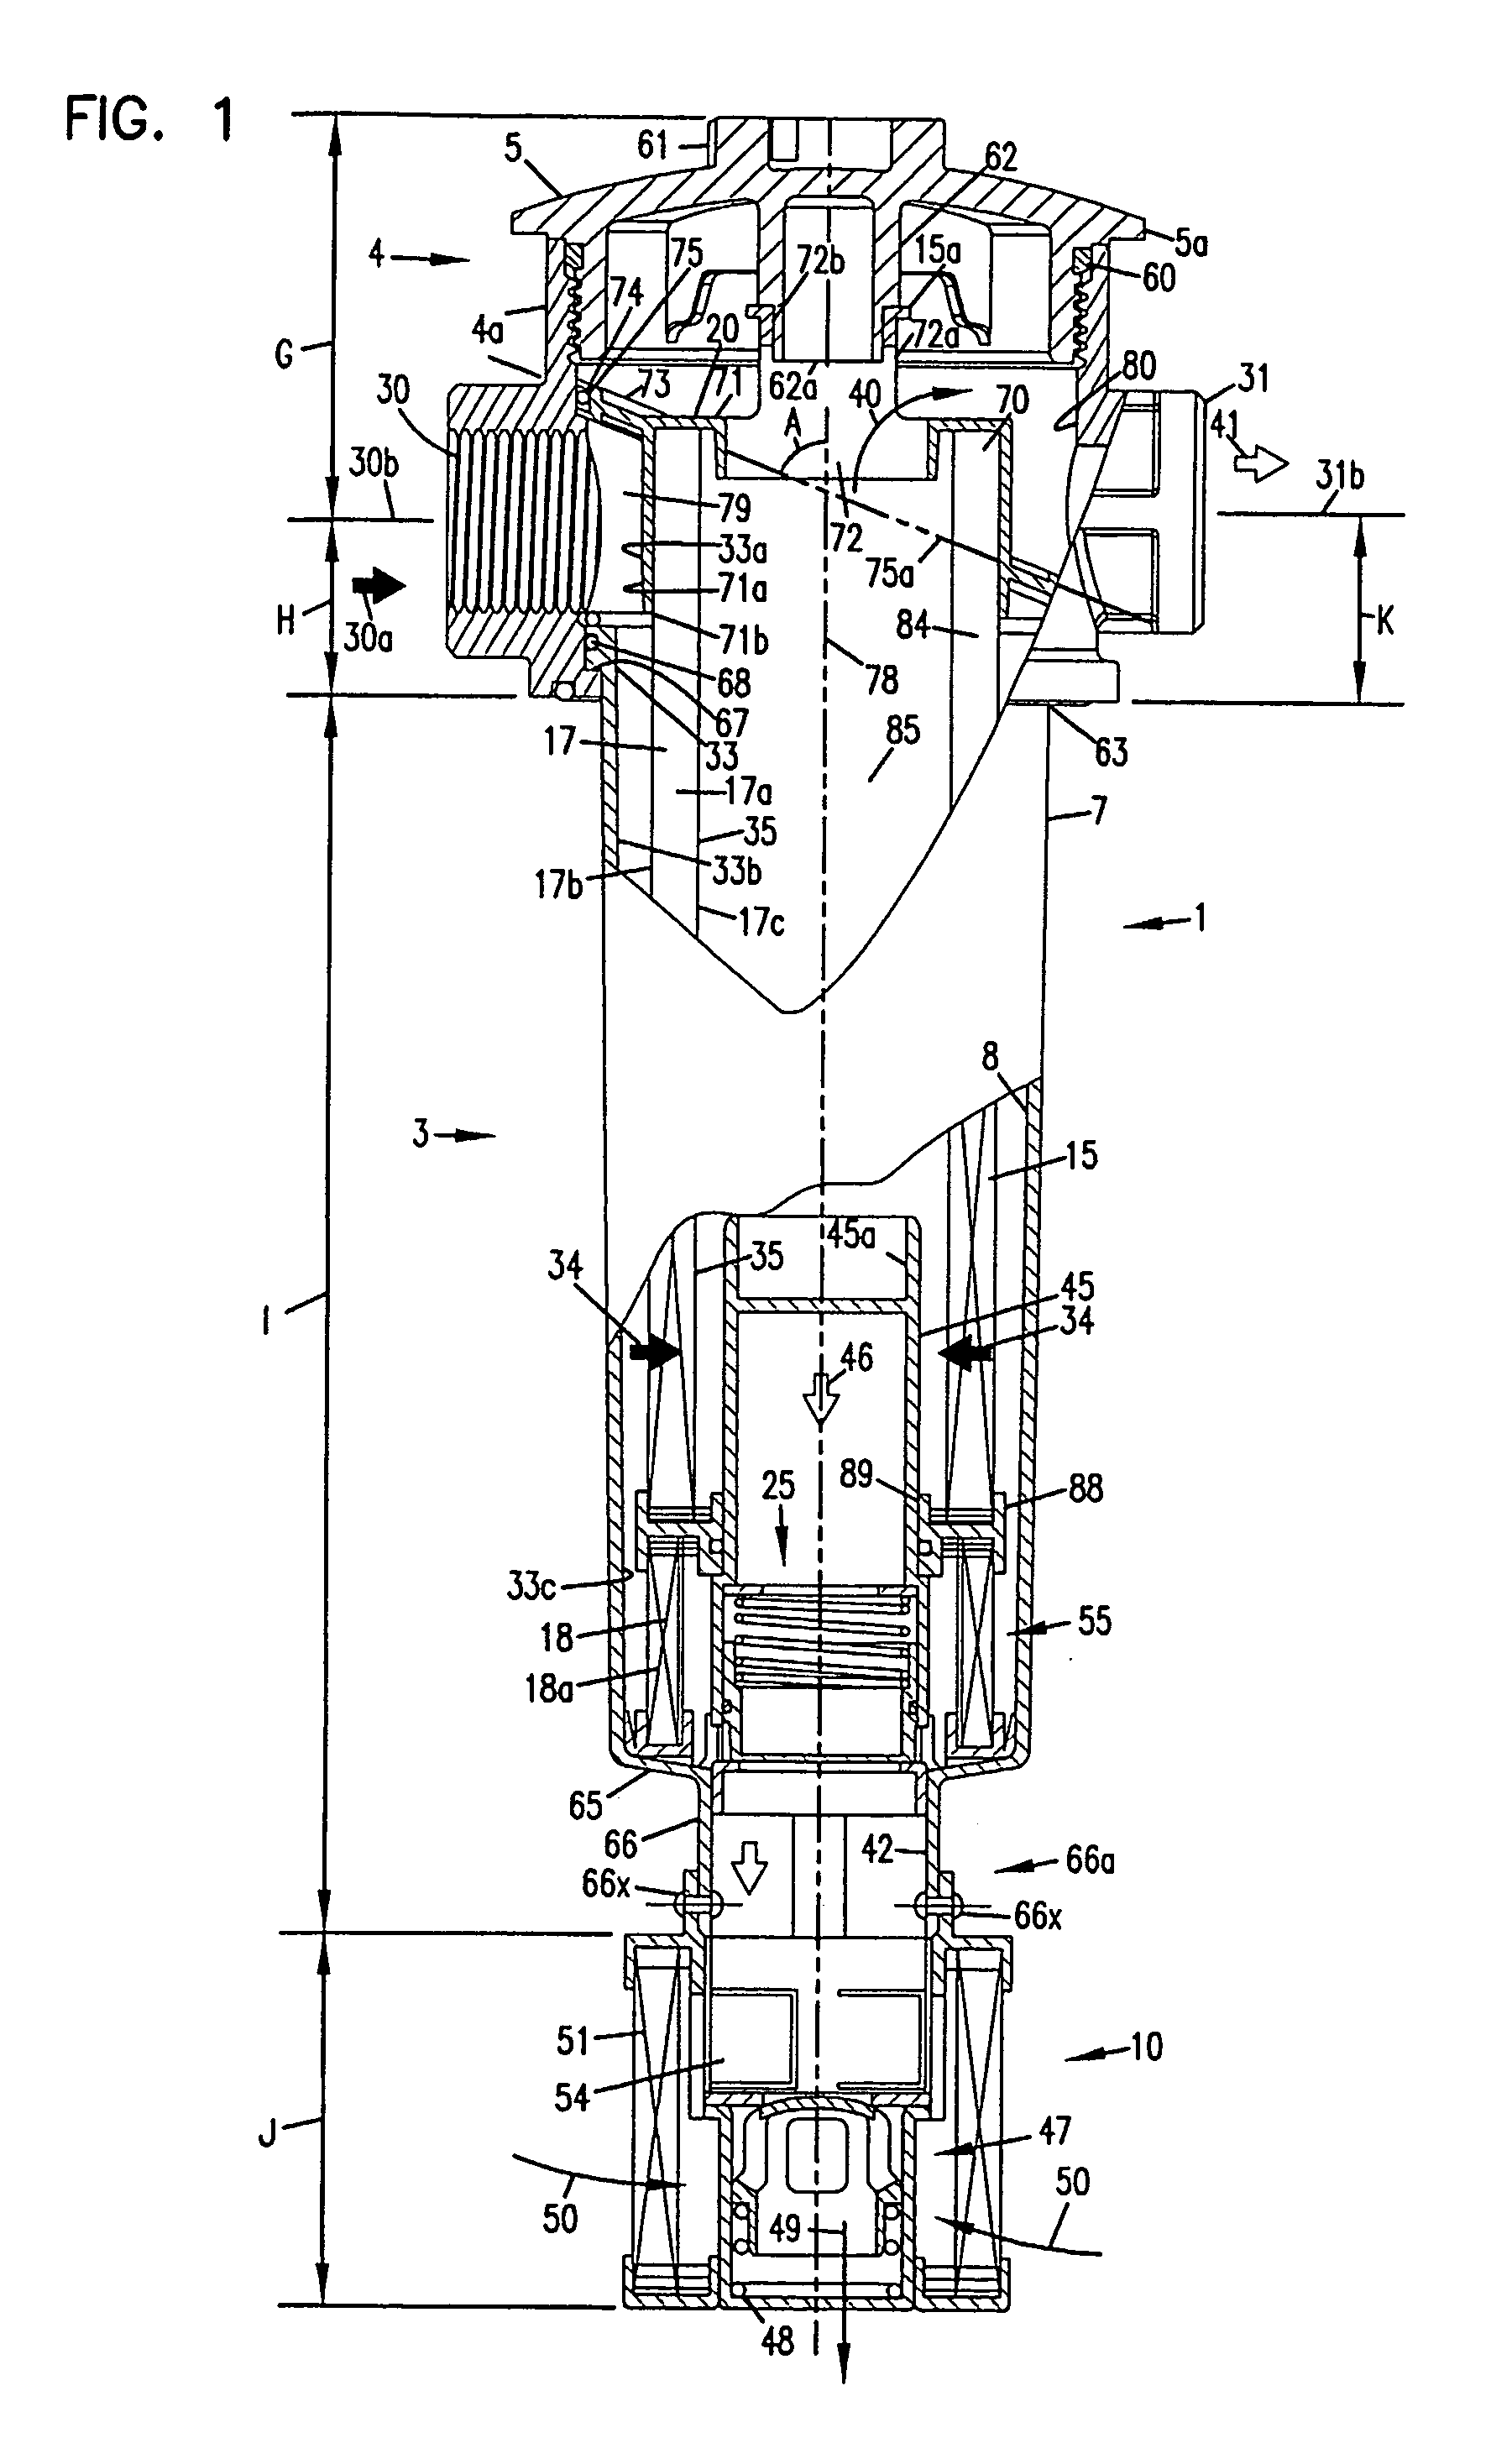 Liquid filter assembly; and methods